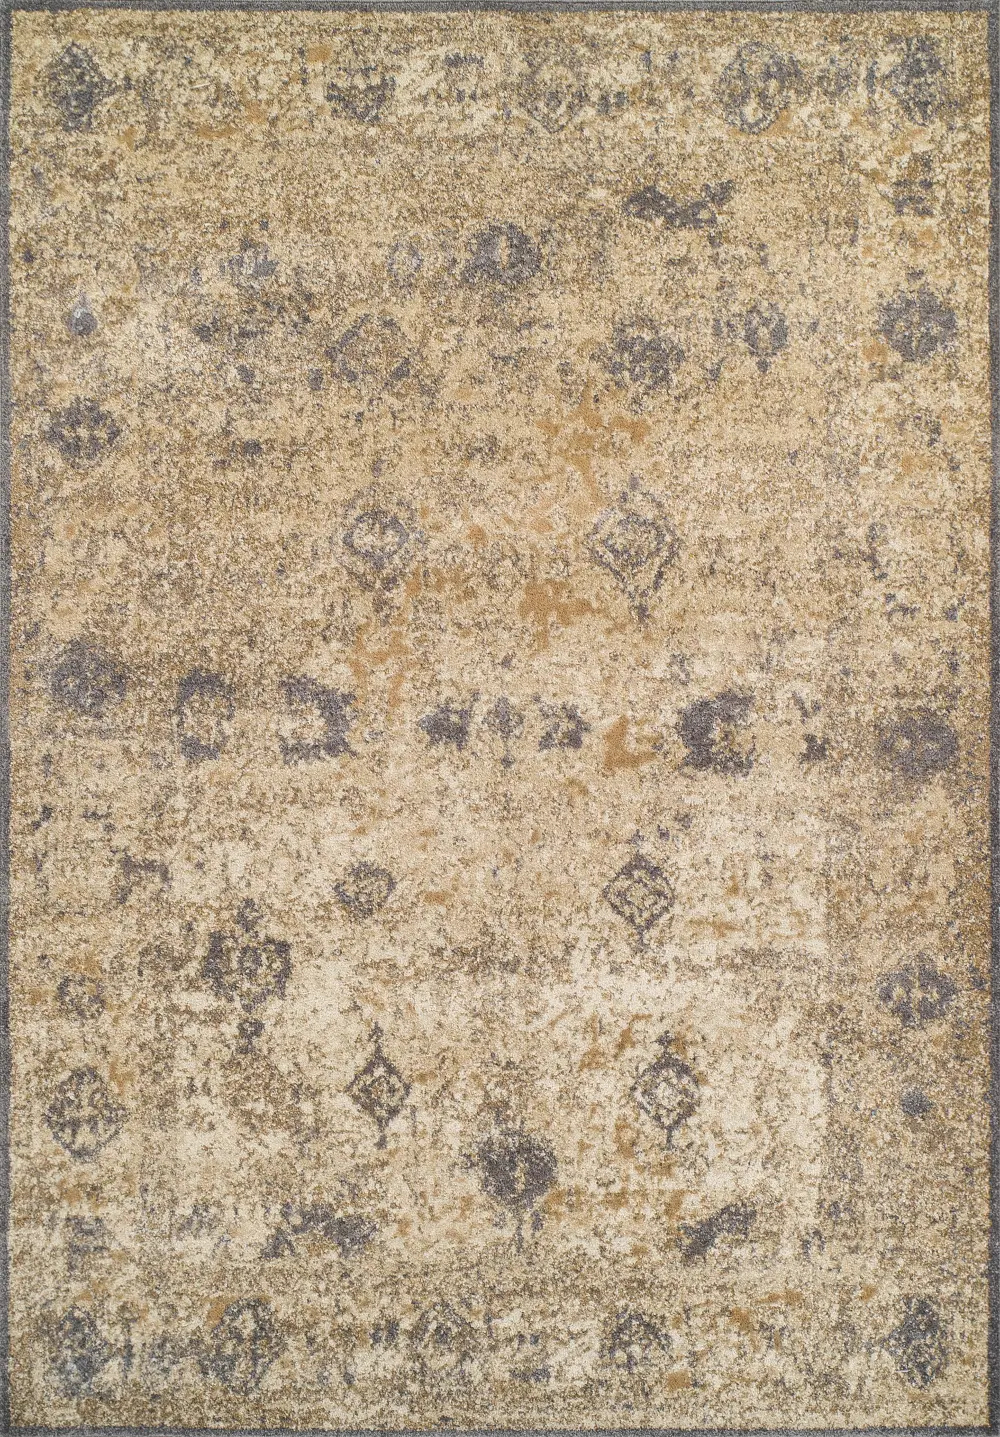 AQ1GR8X11/GREYRUG Antiquity 8 x 11 Ivory and Gray Area Rug-1